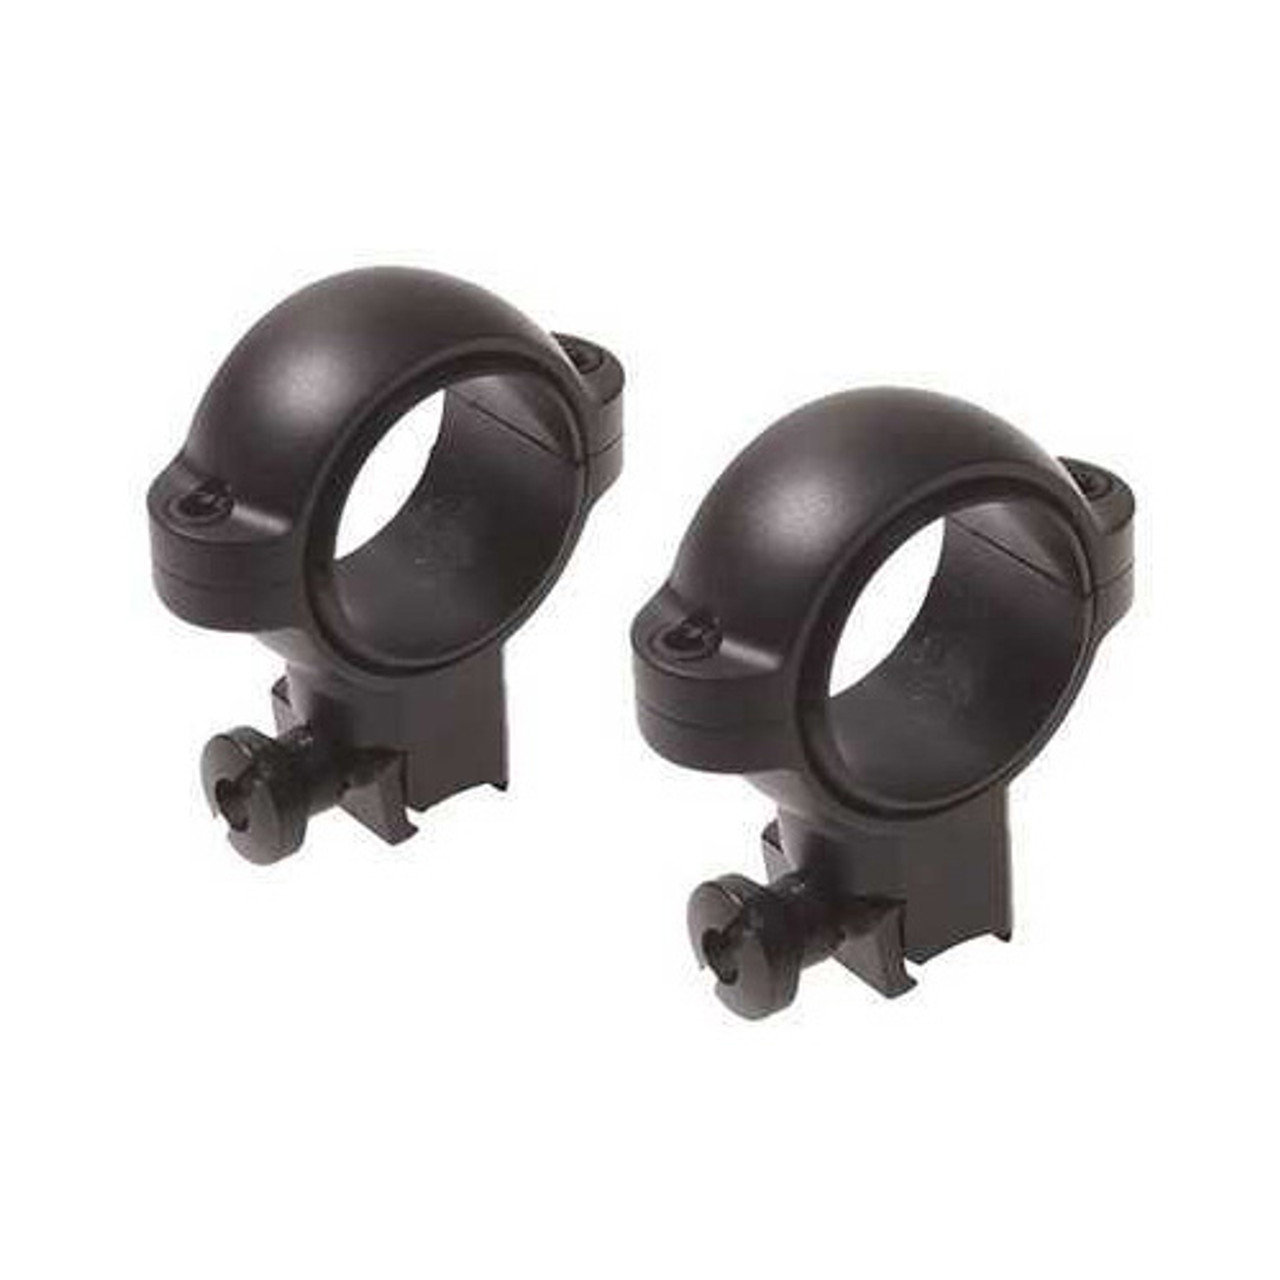 Burris 1" Signature Scope Rings .22 High Fits Rimfire Grooved Receivers